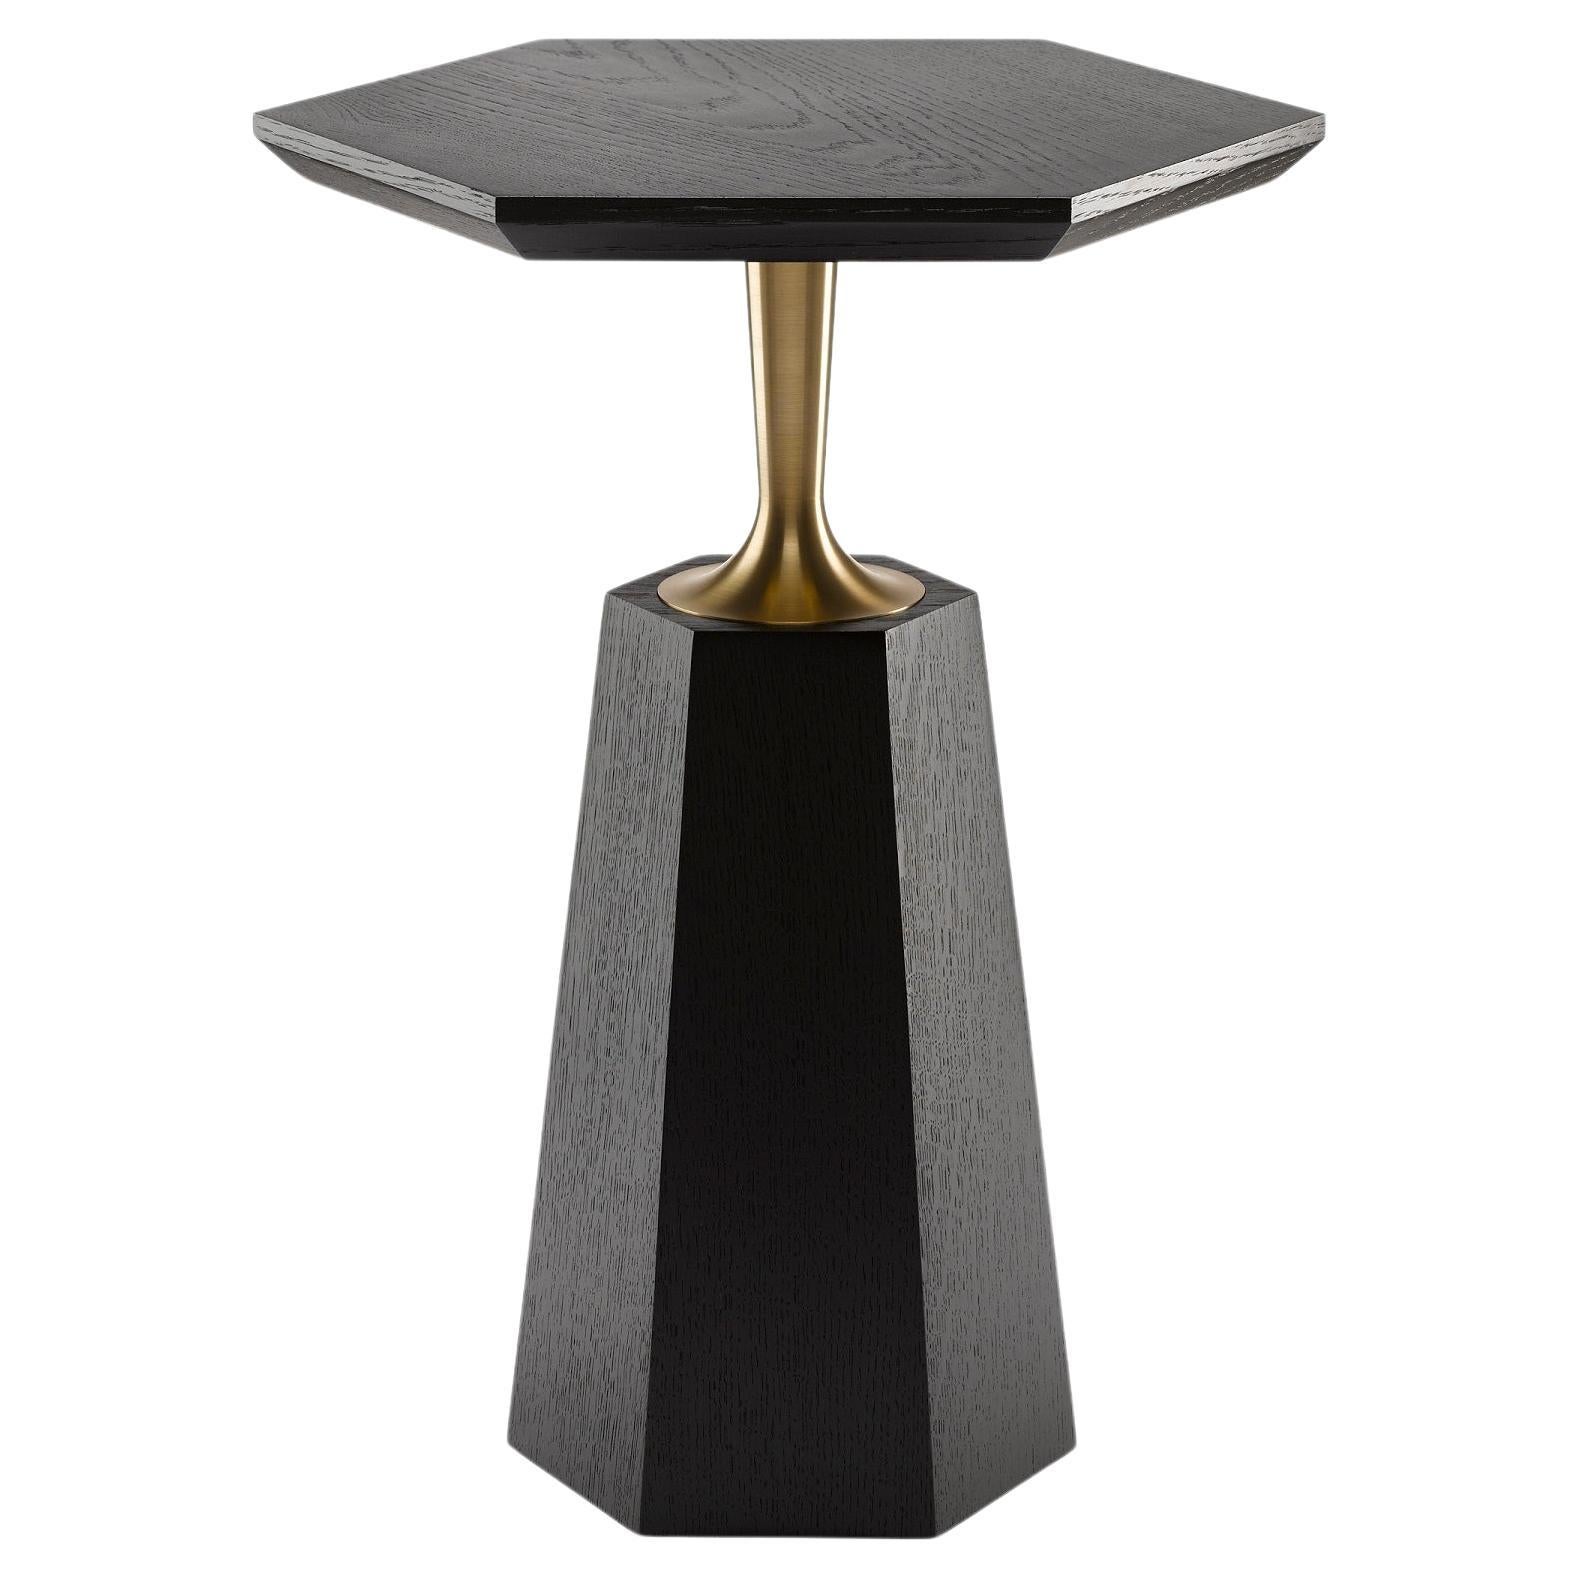 The Hex Side Table has a hexagonal tapering base giving rise to a precision engineered brass neck that supports either a round or hexagonal top. Shown here: in ebonised oak and machine turned solid brass. The brass is available in either a natural